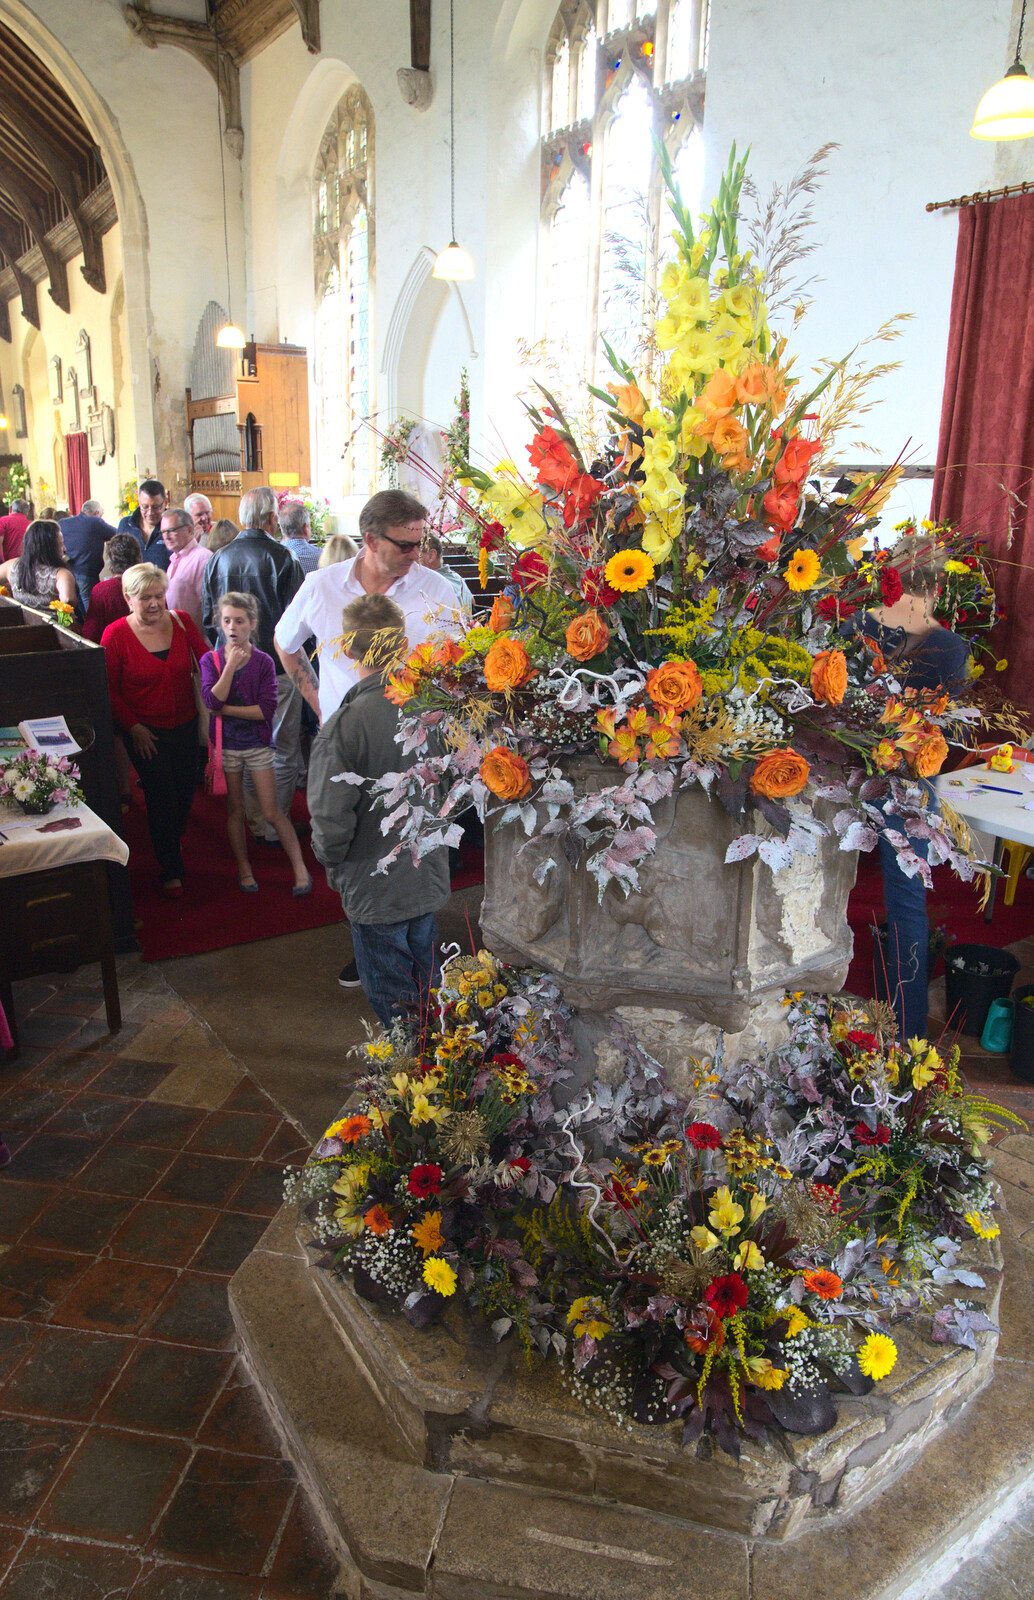 The impressive flower arrangement from The Oaksmere, and the Gislingham Flower Festival, Suffolk - 24th August 2014